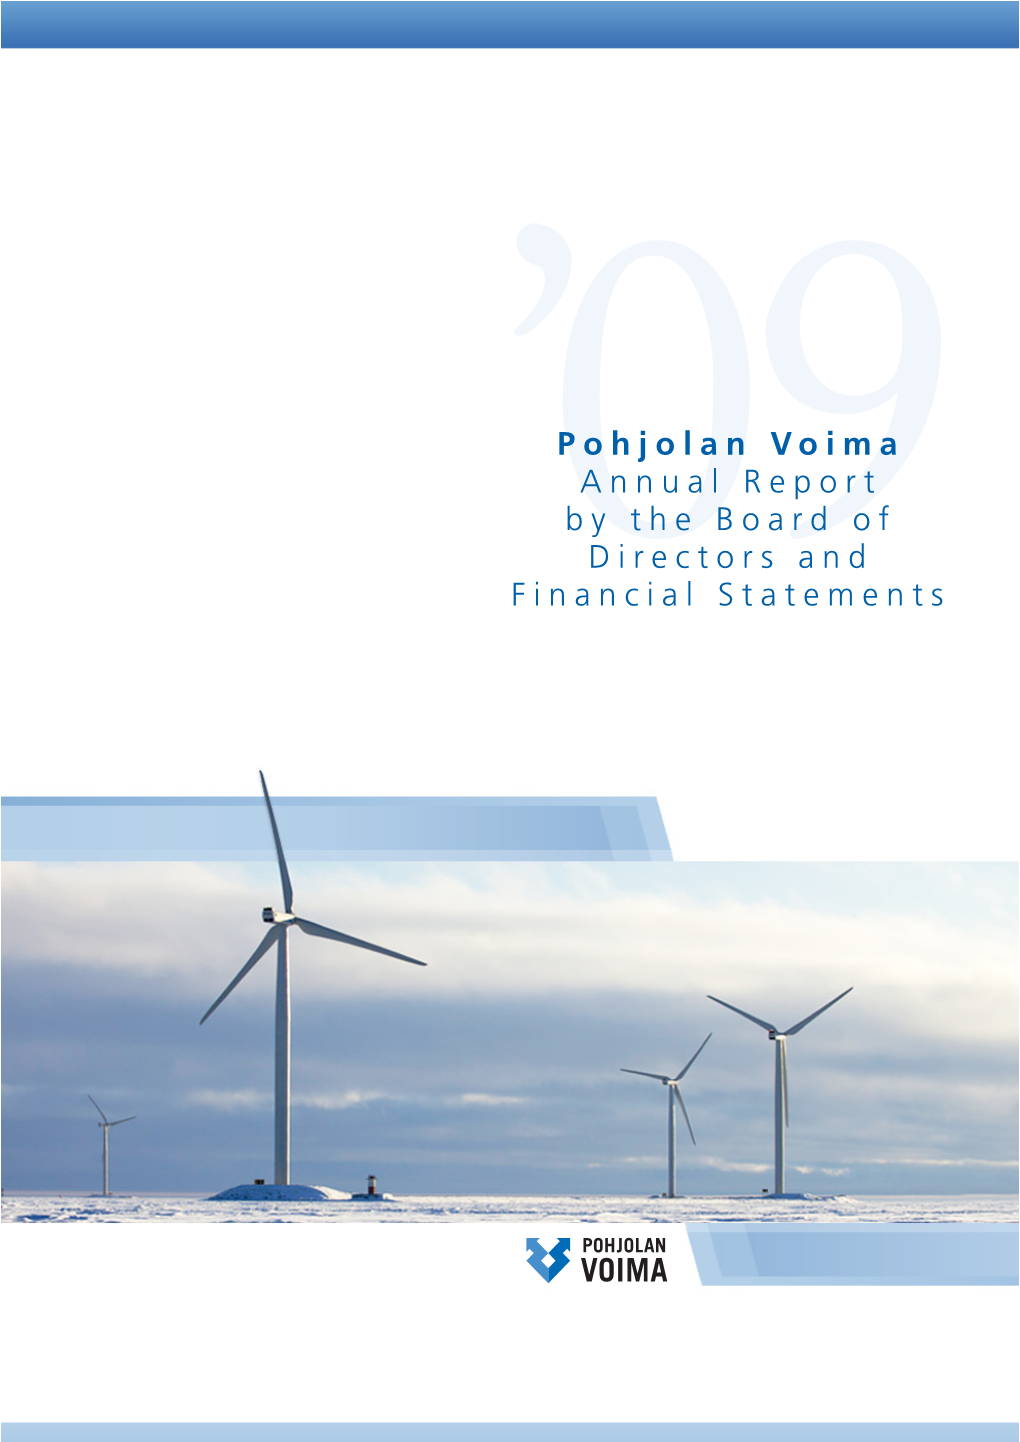 '09Pohjolan Voima Annual Report by the Board of Directors and Financial